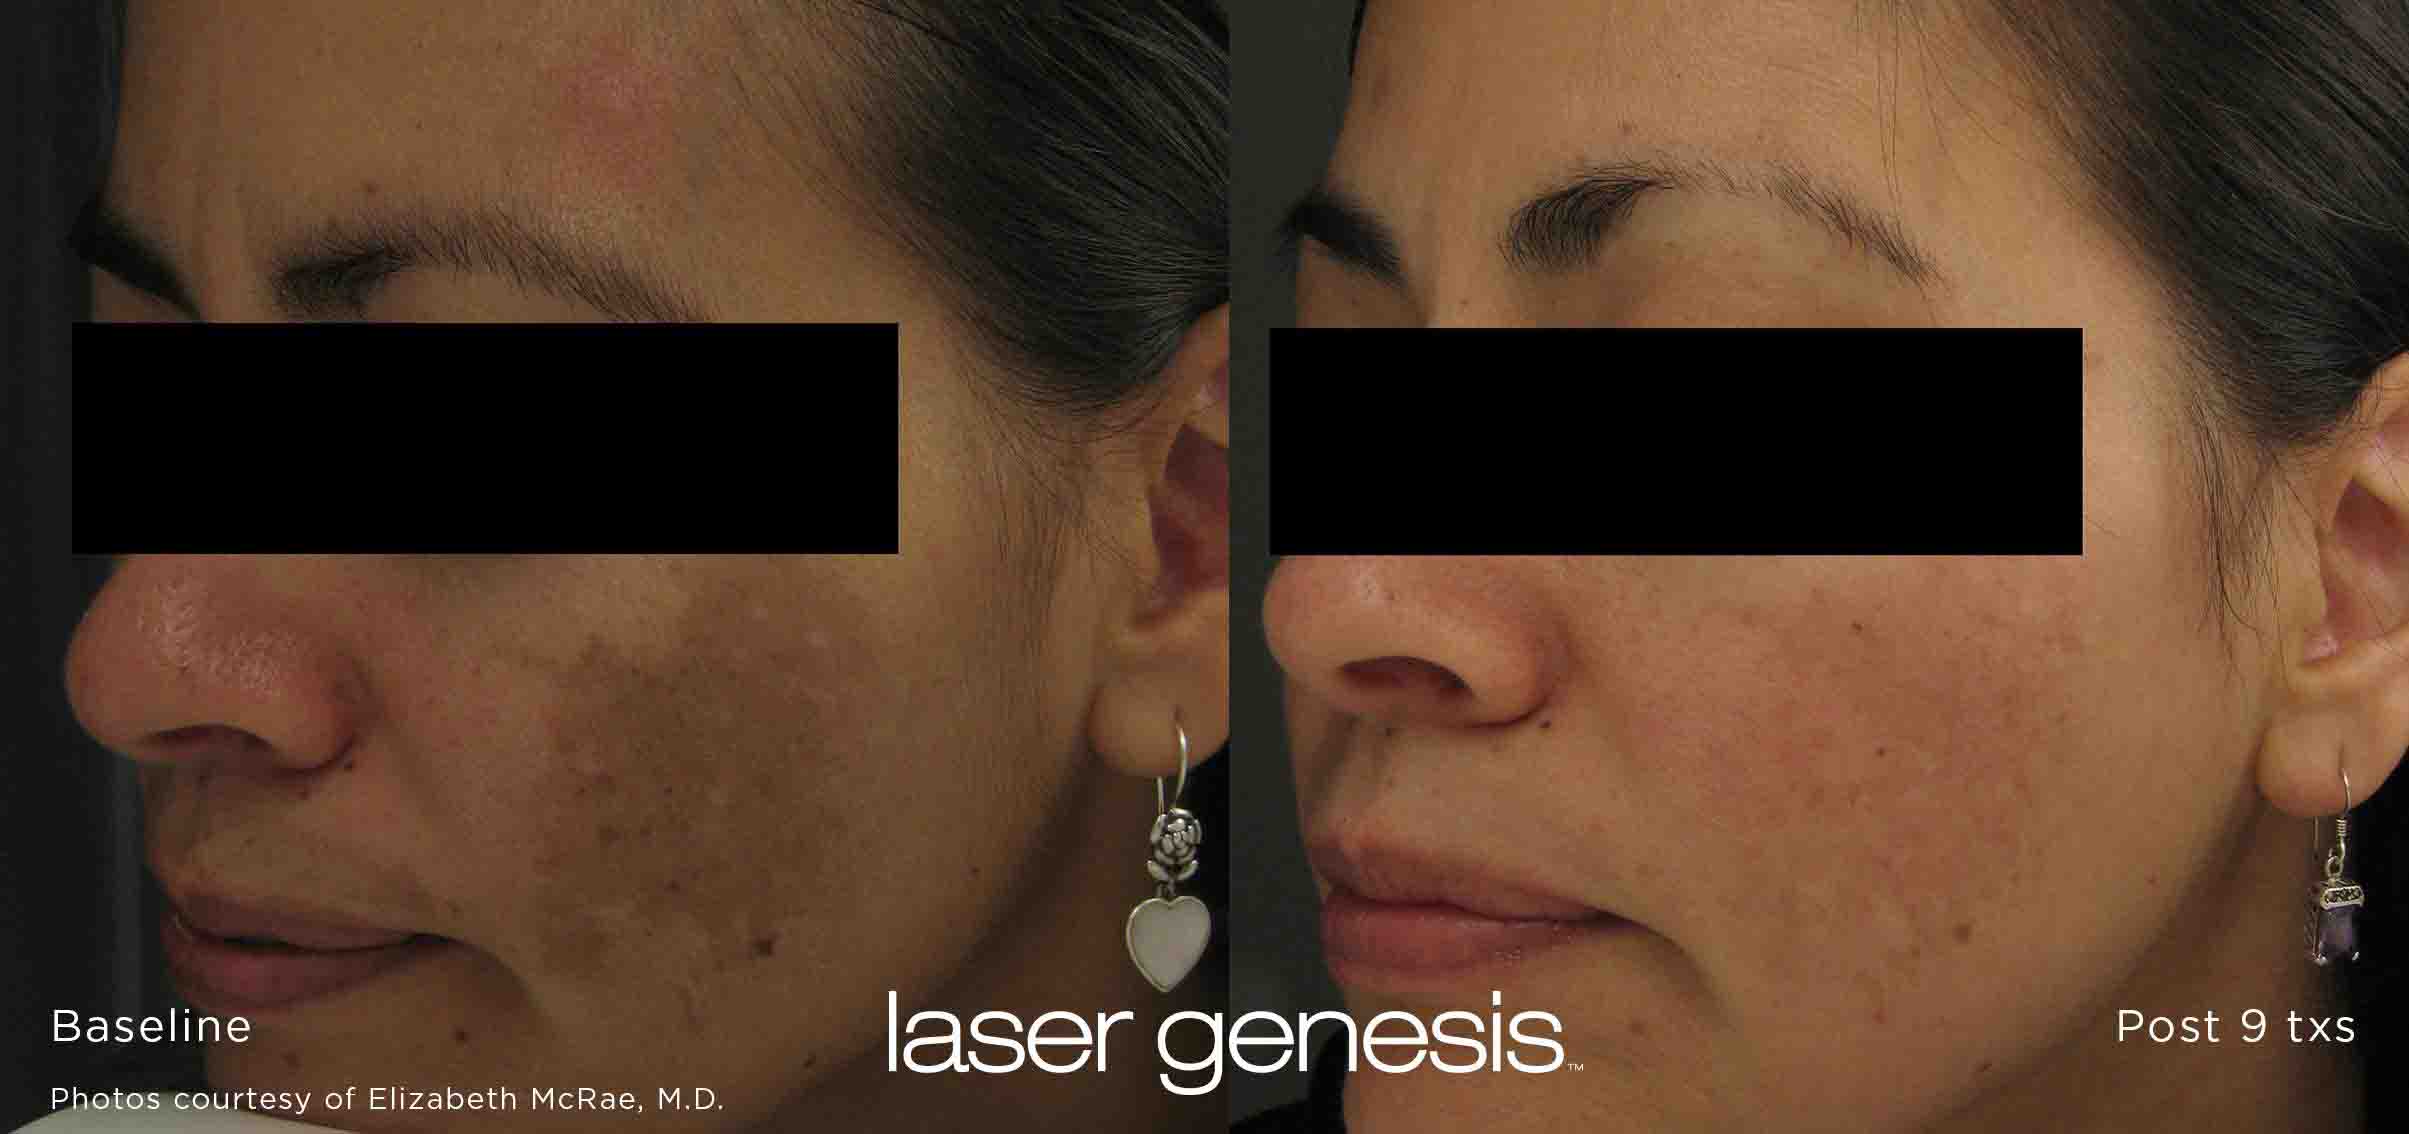 XEO laser genesis results before after